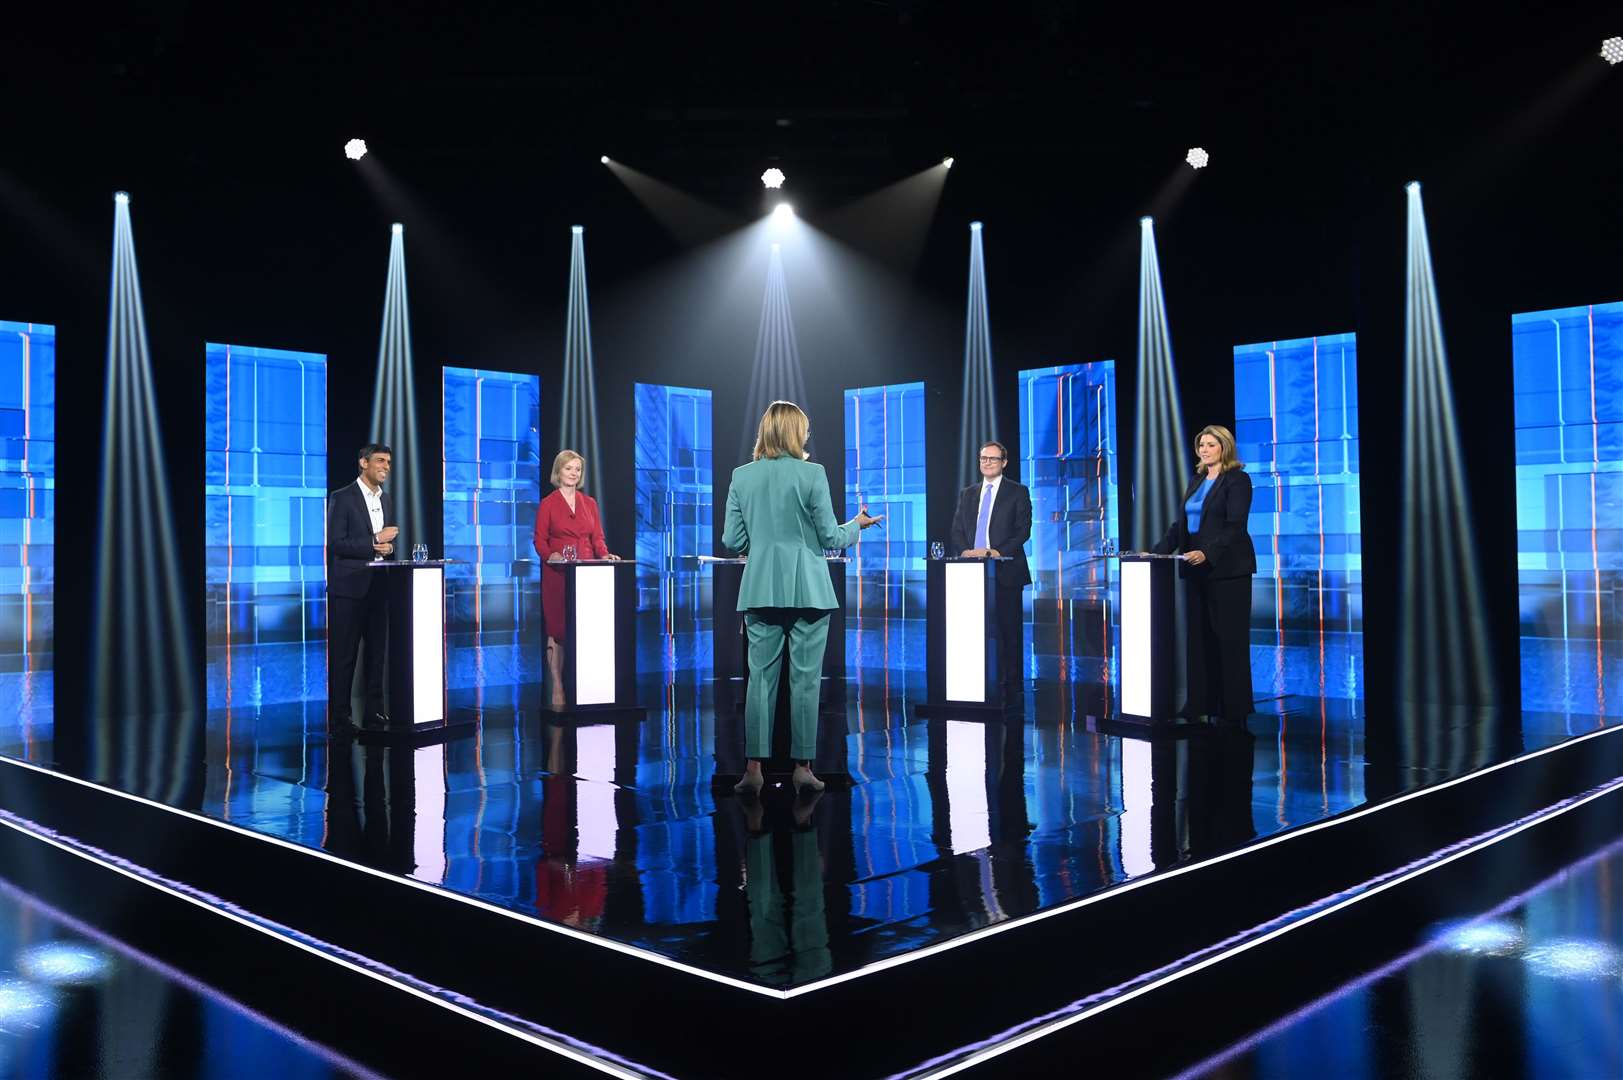 The Tory leadership candidates and presenter Julie Etchingham on stage in the ITV televised debate (Jonathan Hordle/ITV/PA)